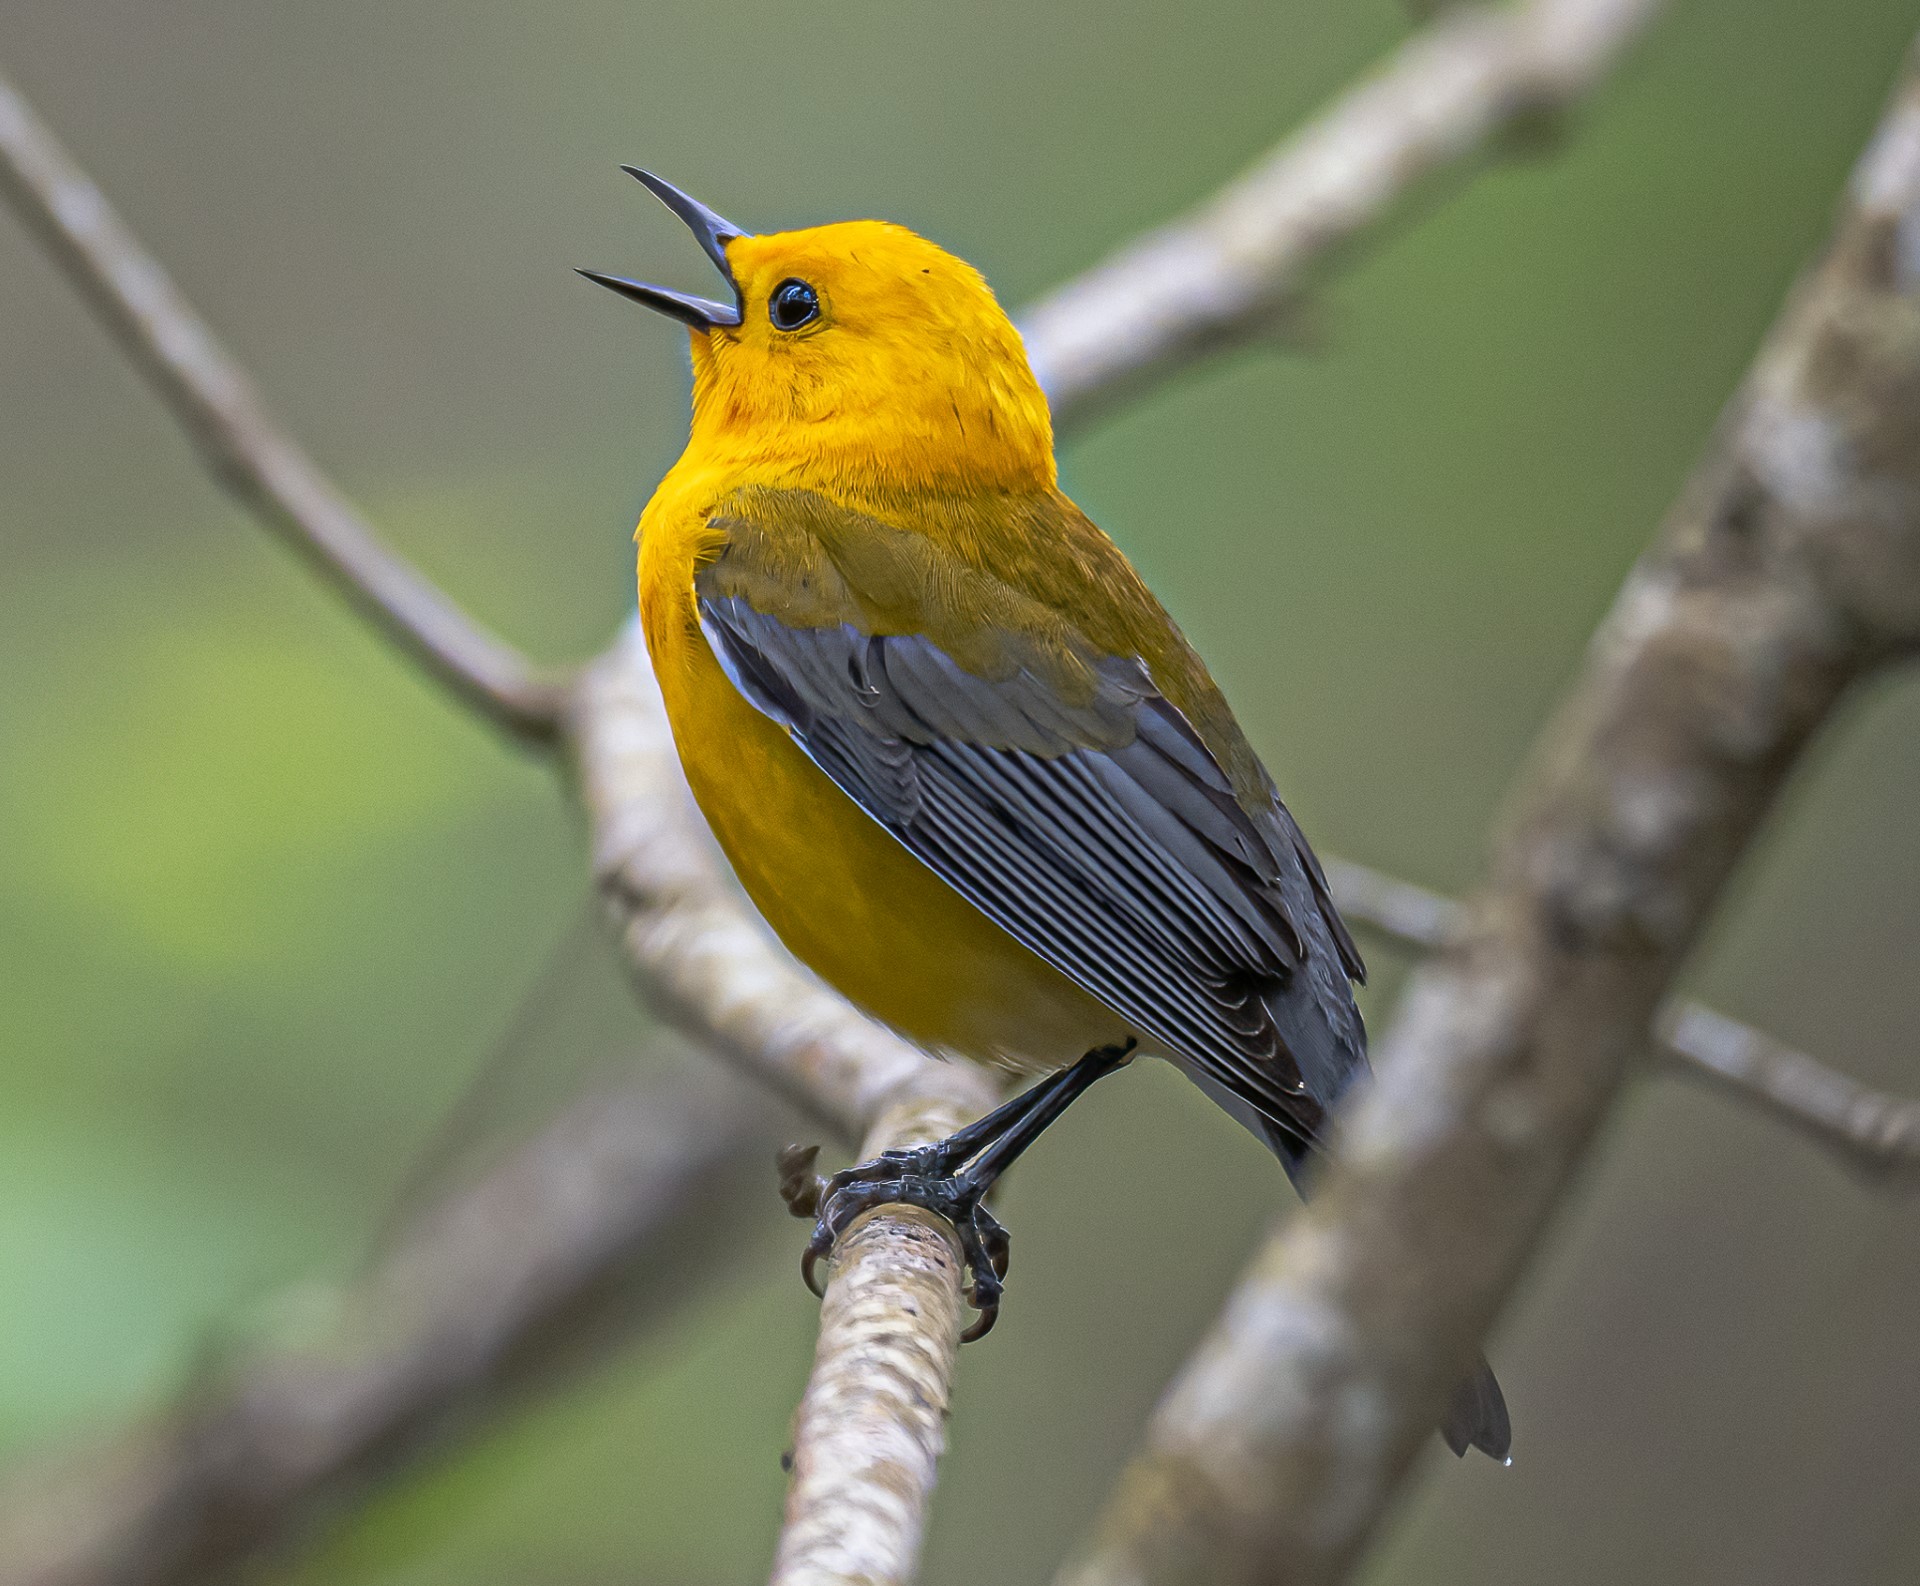 A yellow bird with black eyes, beak and blue wings is perched on a small branch sings, beak pointing towards the sky